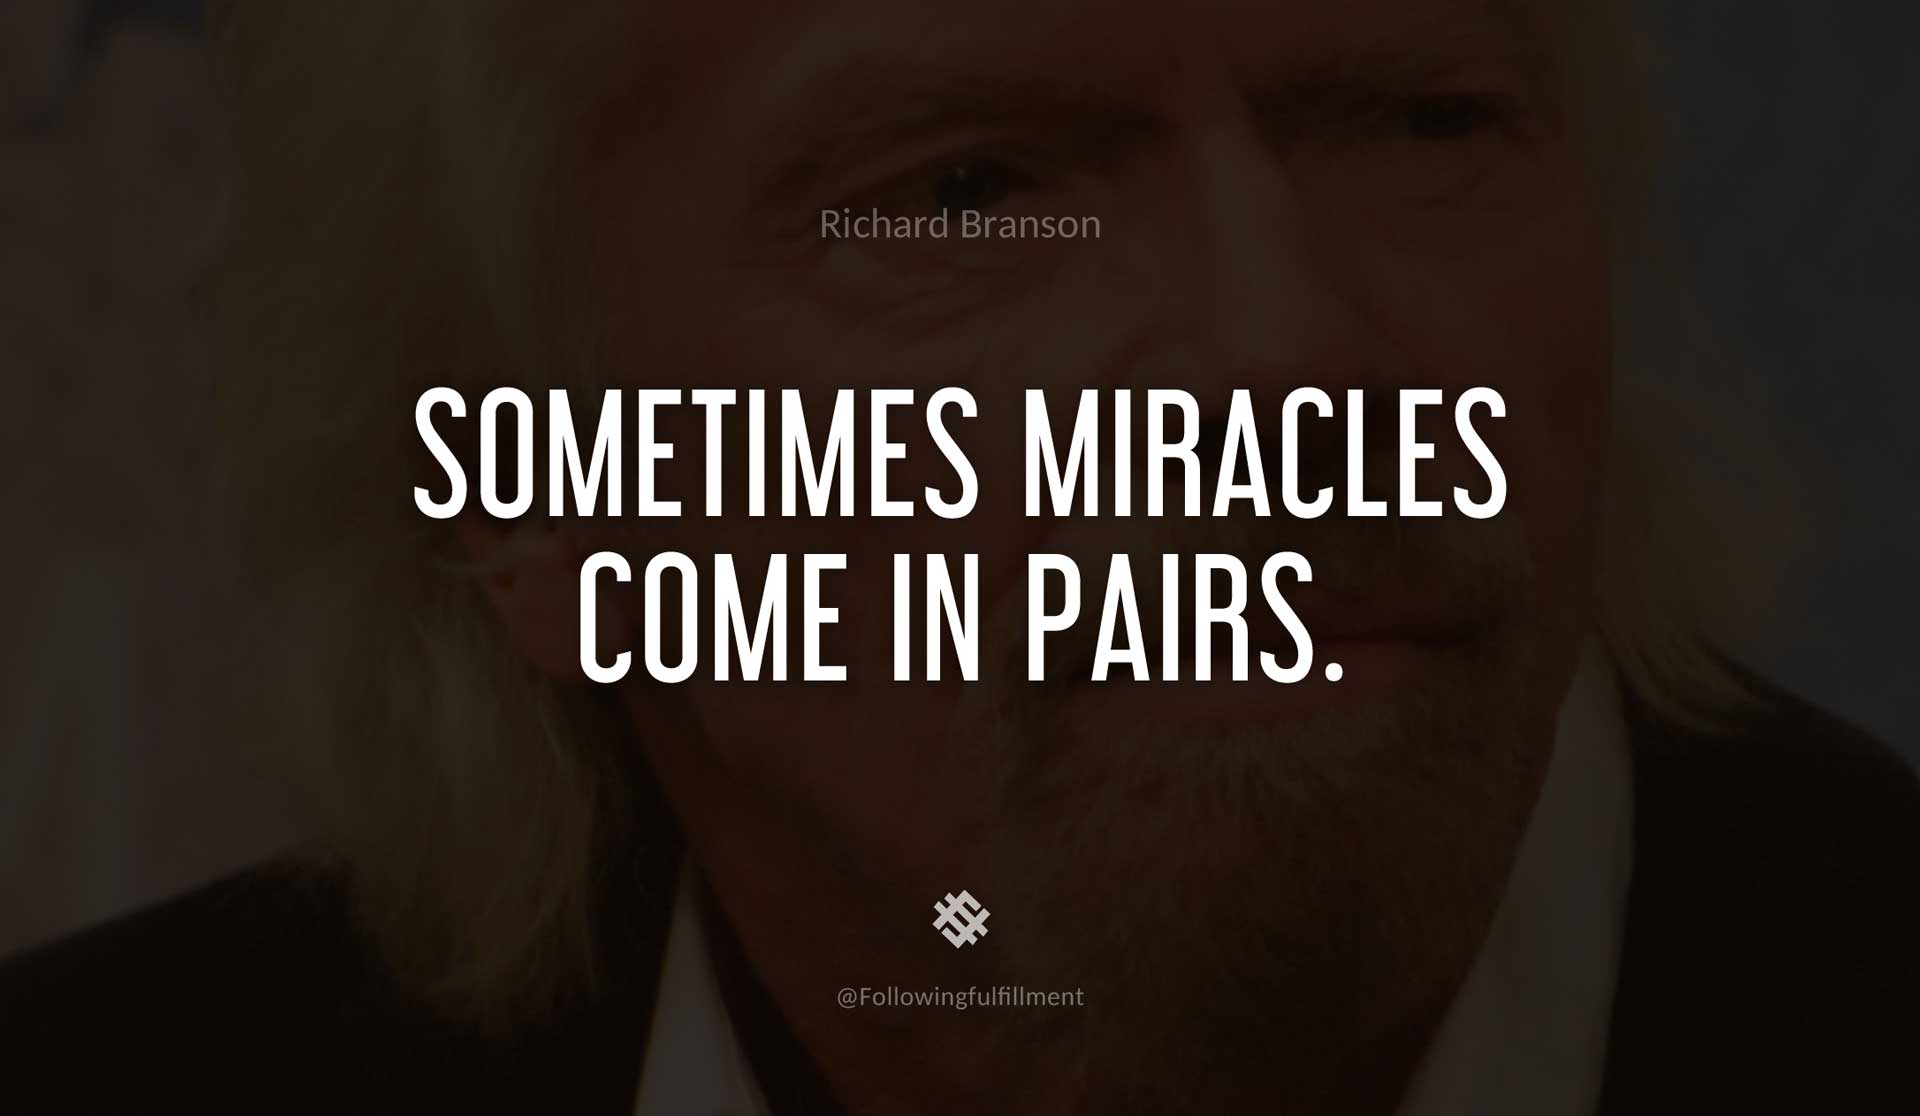 Sometimes-miracles-come-in-pairs.-RICHARD-BRANSON-Quote.jpg